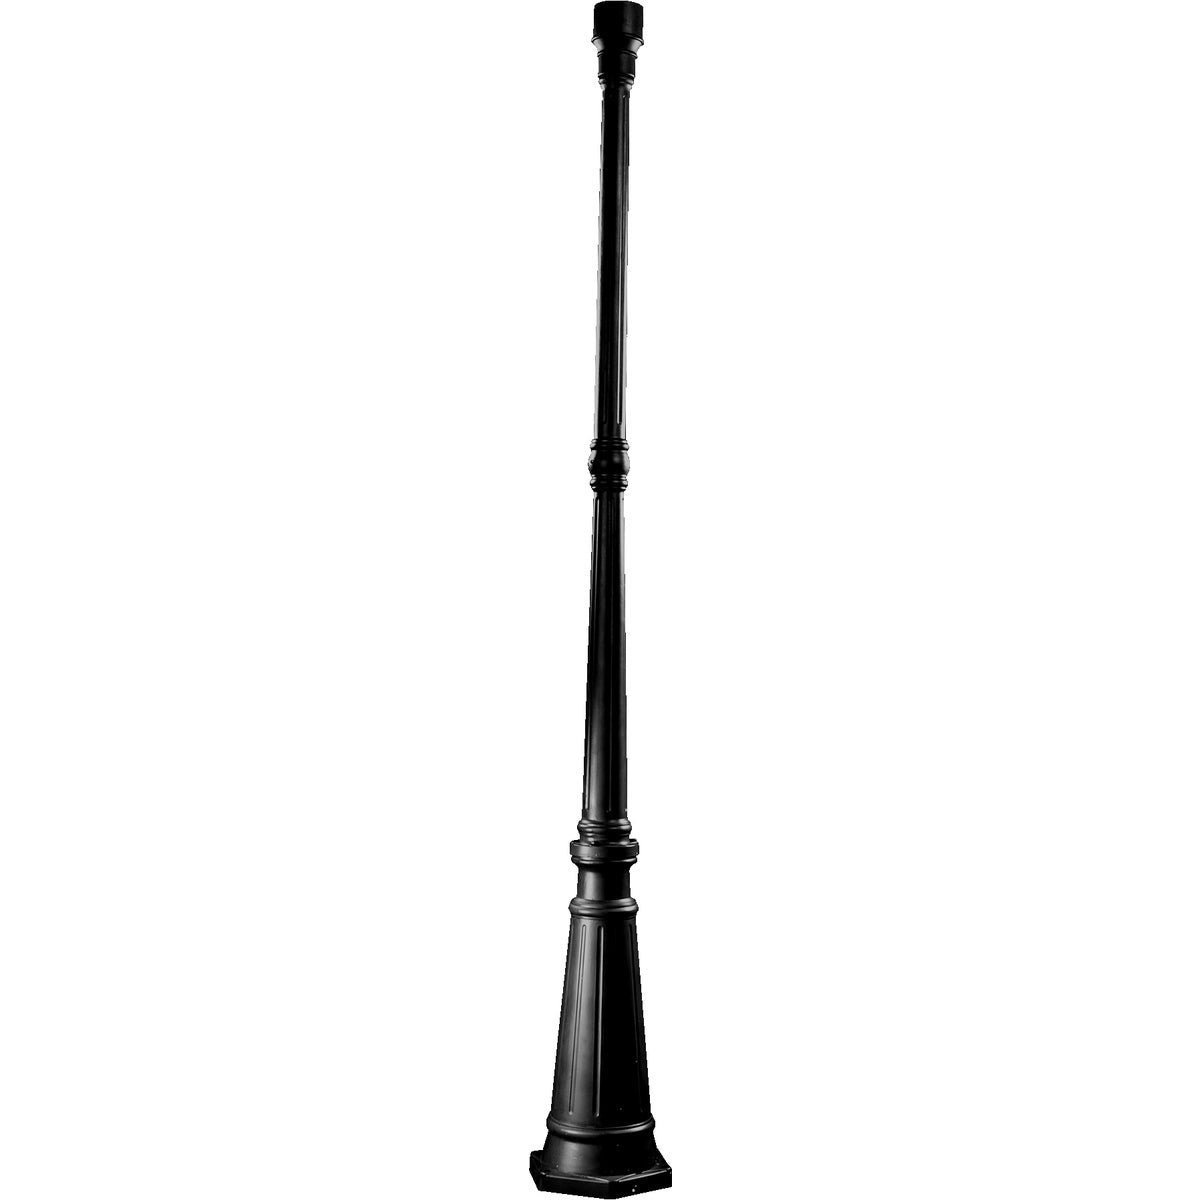 Outdoor Lamp Post with cast aluminum base, 73&quot; tall. Compatible with 3&quot; outdoor post lights. Durable and weather-resistant for wet locations. Easy ground mount installation. Add security to your lawn, patio, or porch. UL Listed. Wet Location safety rating. Gloss Black finish. 9.5&quot;W x 73&quot;H.